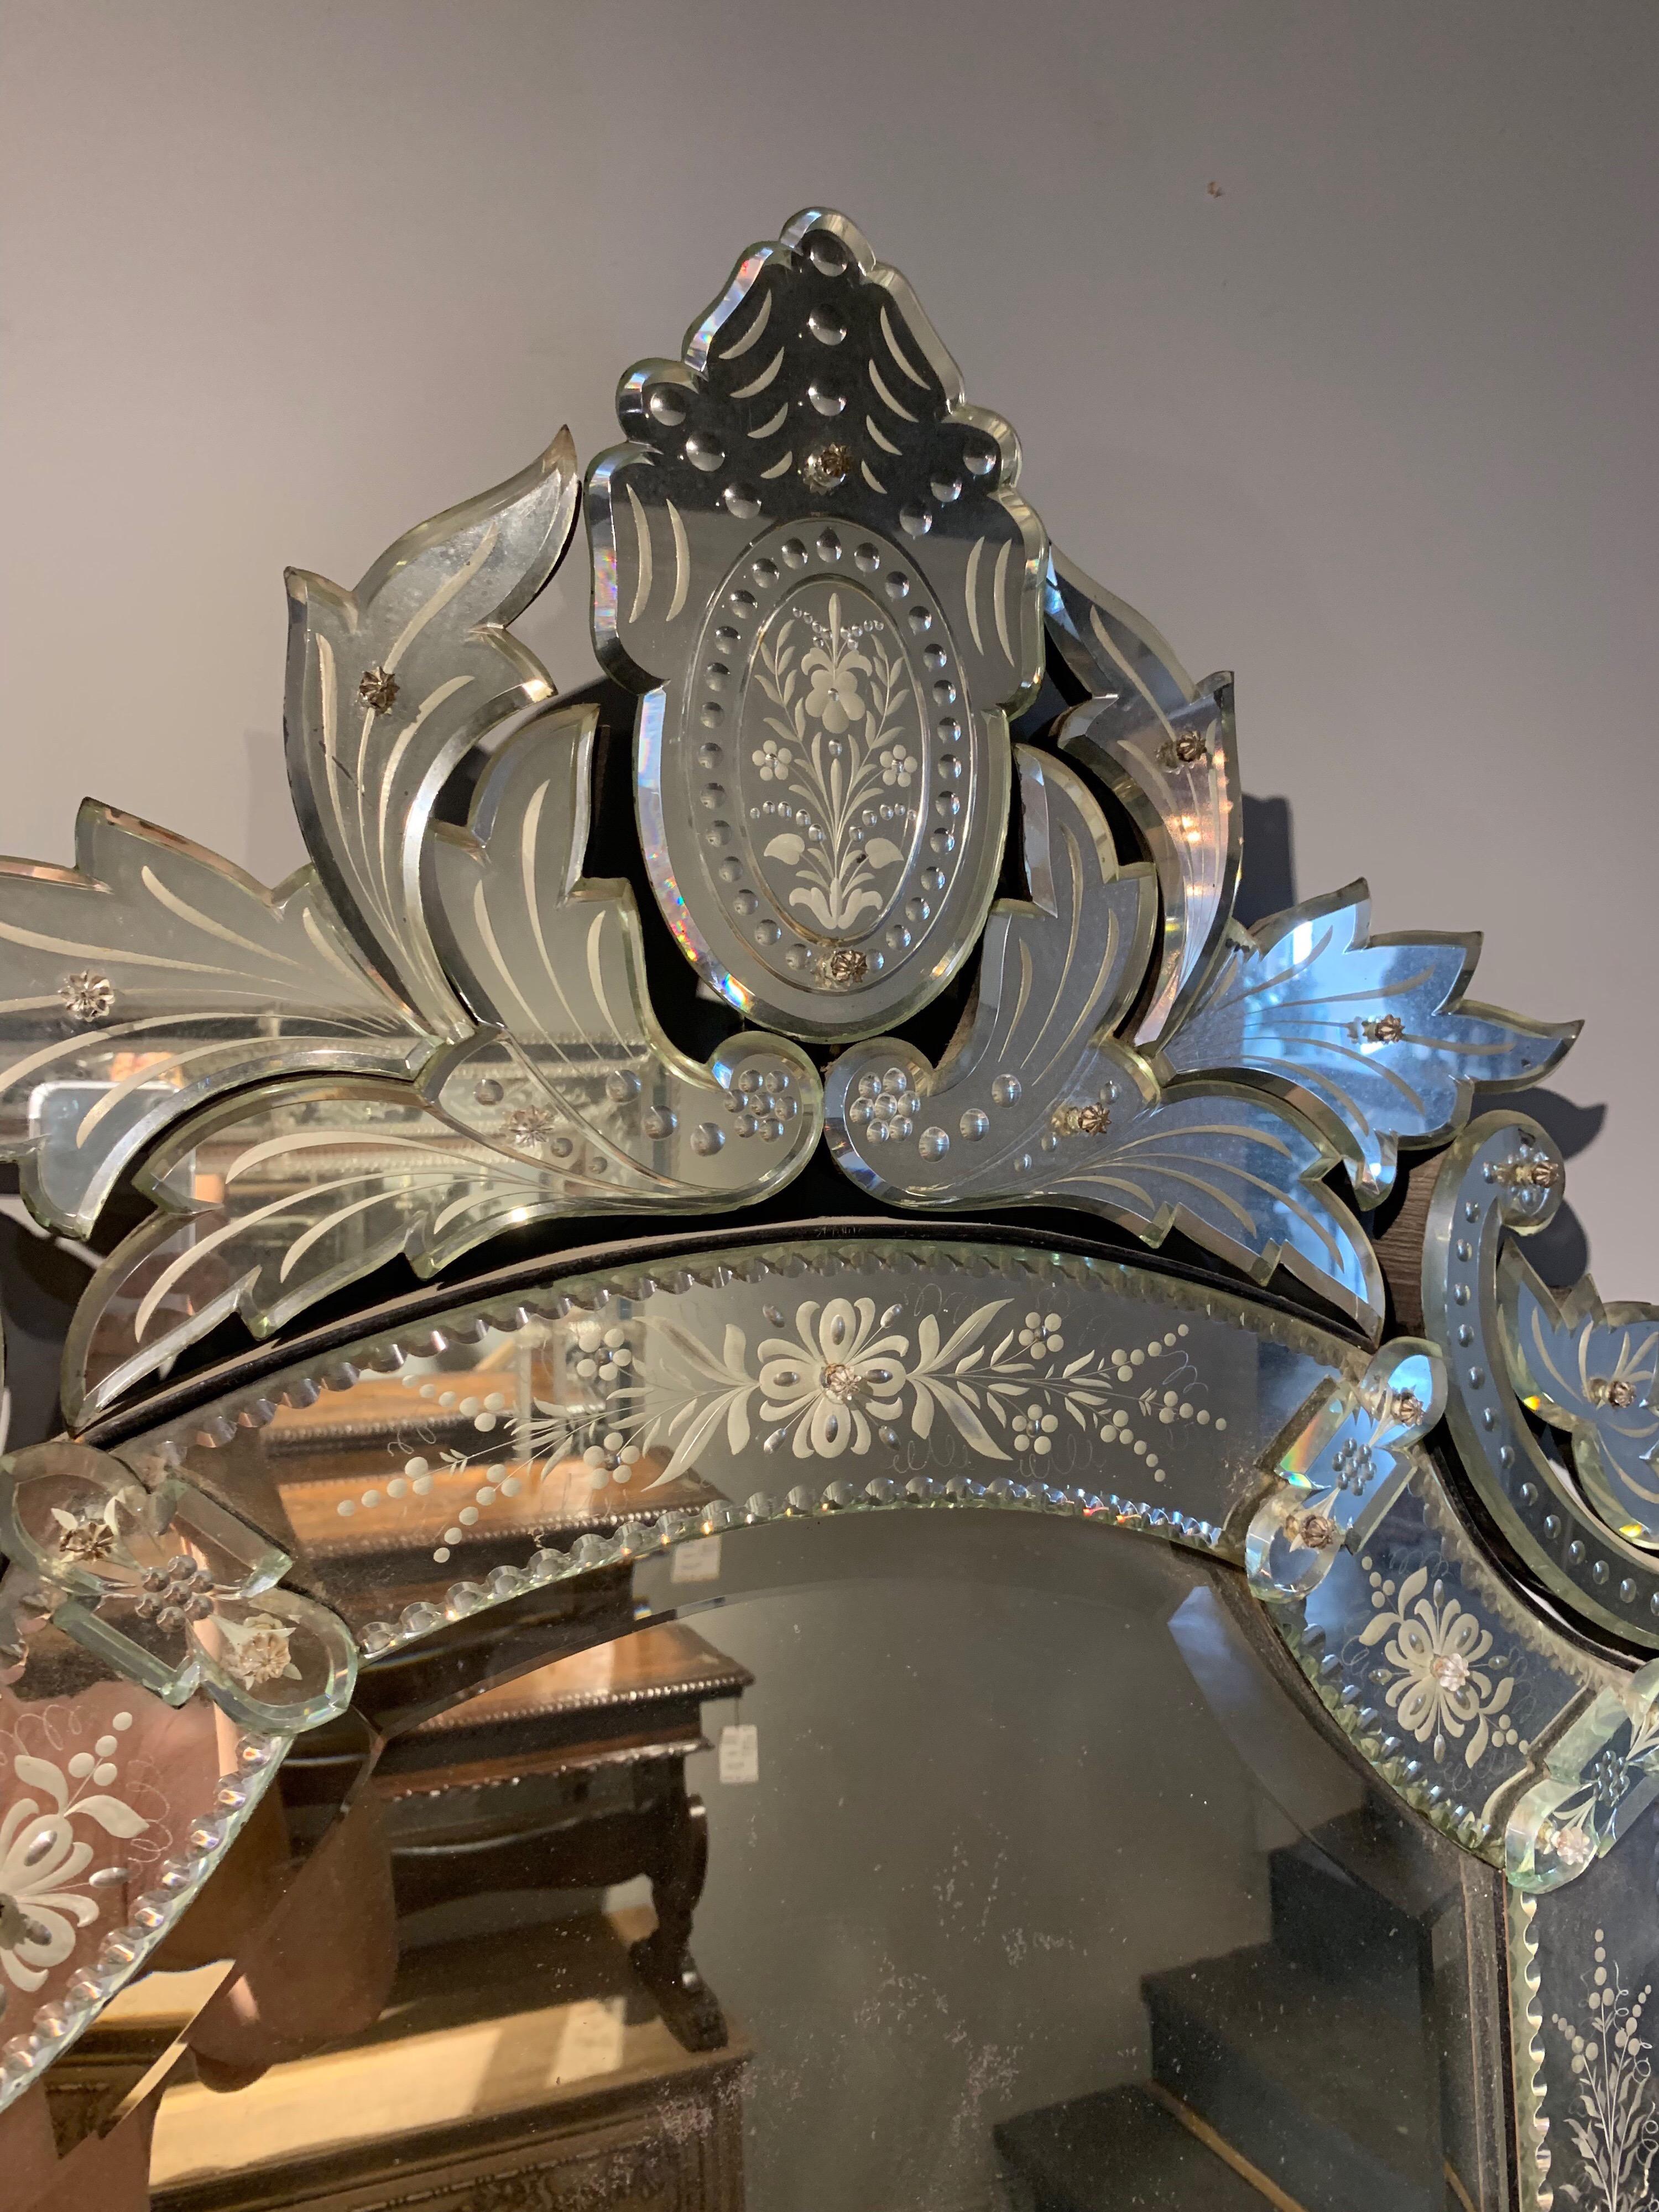 Superb antique Venetian etched glass mirror. Beautiful etching of flowers and there is a crown at the top of the mirror as well as other scrolls along the edges. Makes an impressive statement.